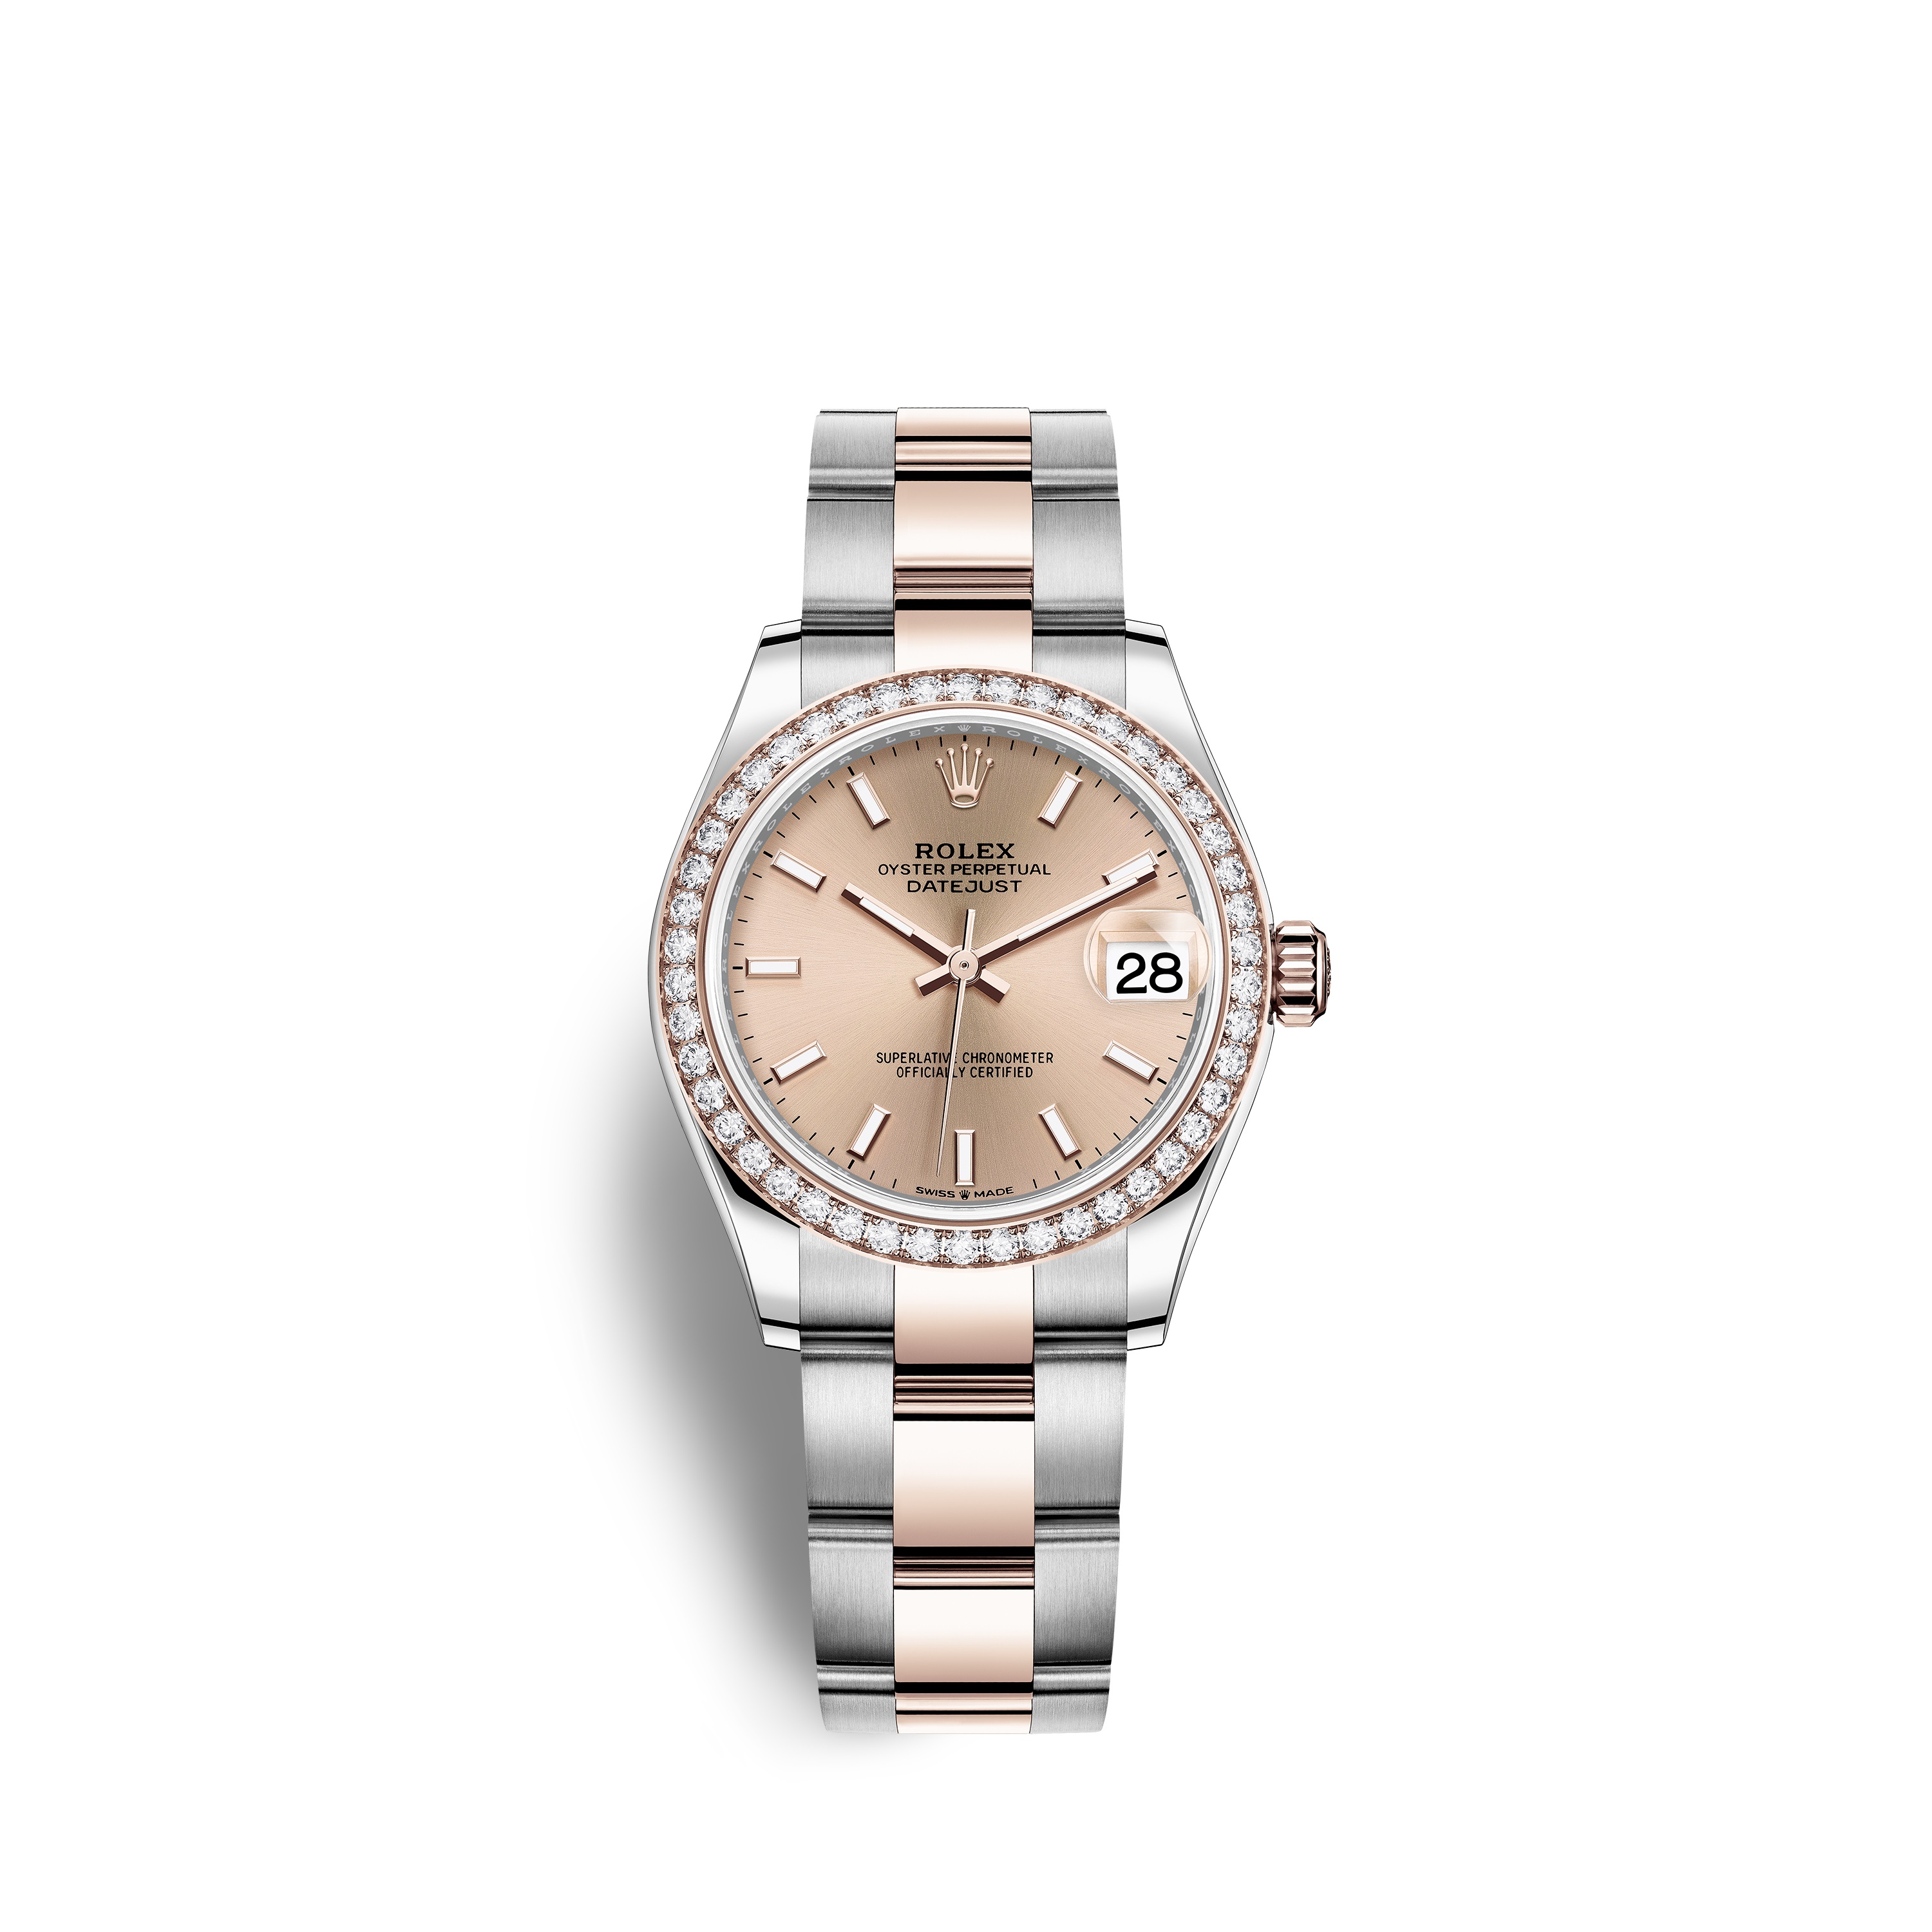 Datejust 31 278381RBR Rose Gold, Stainless Steel & Diamonds Watch (Rosé Colour)